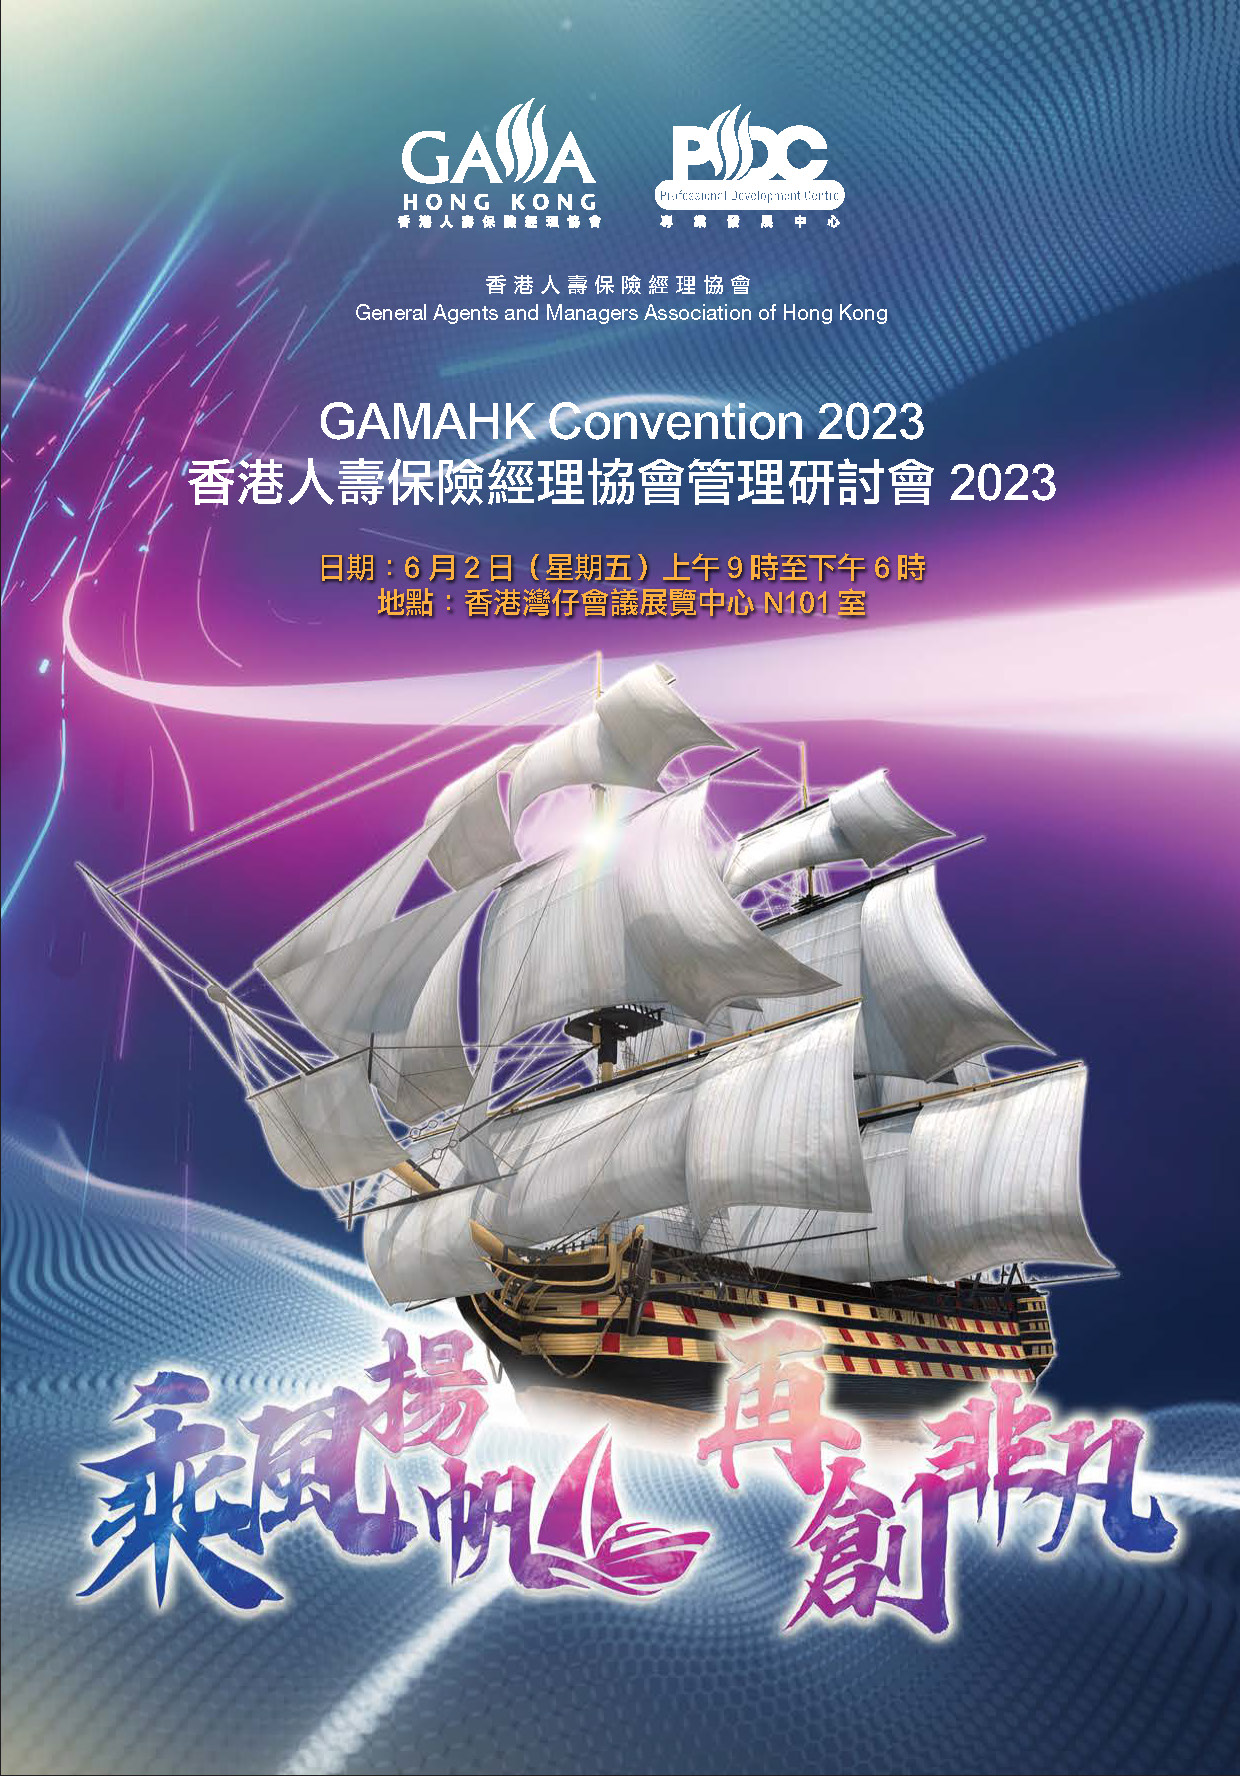 GAMAHK Convention 2023 - Booklet Cover (Final)